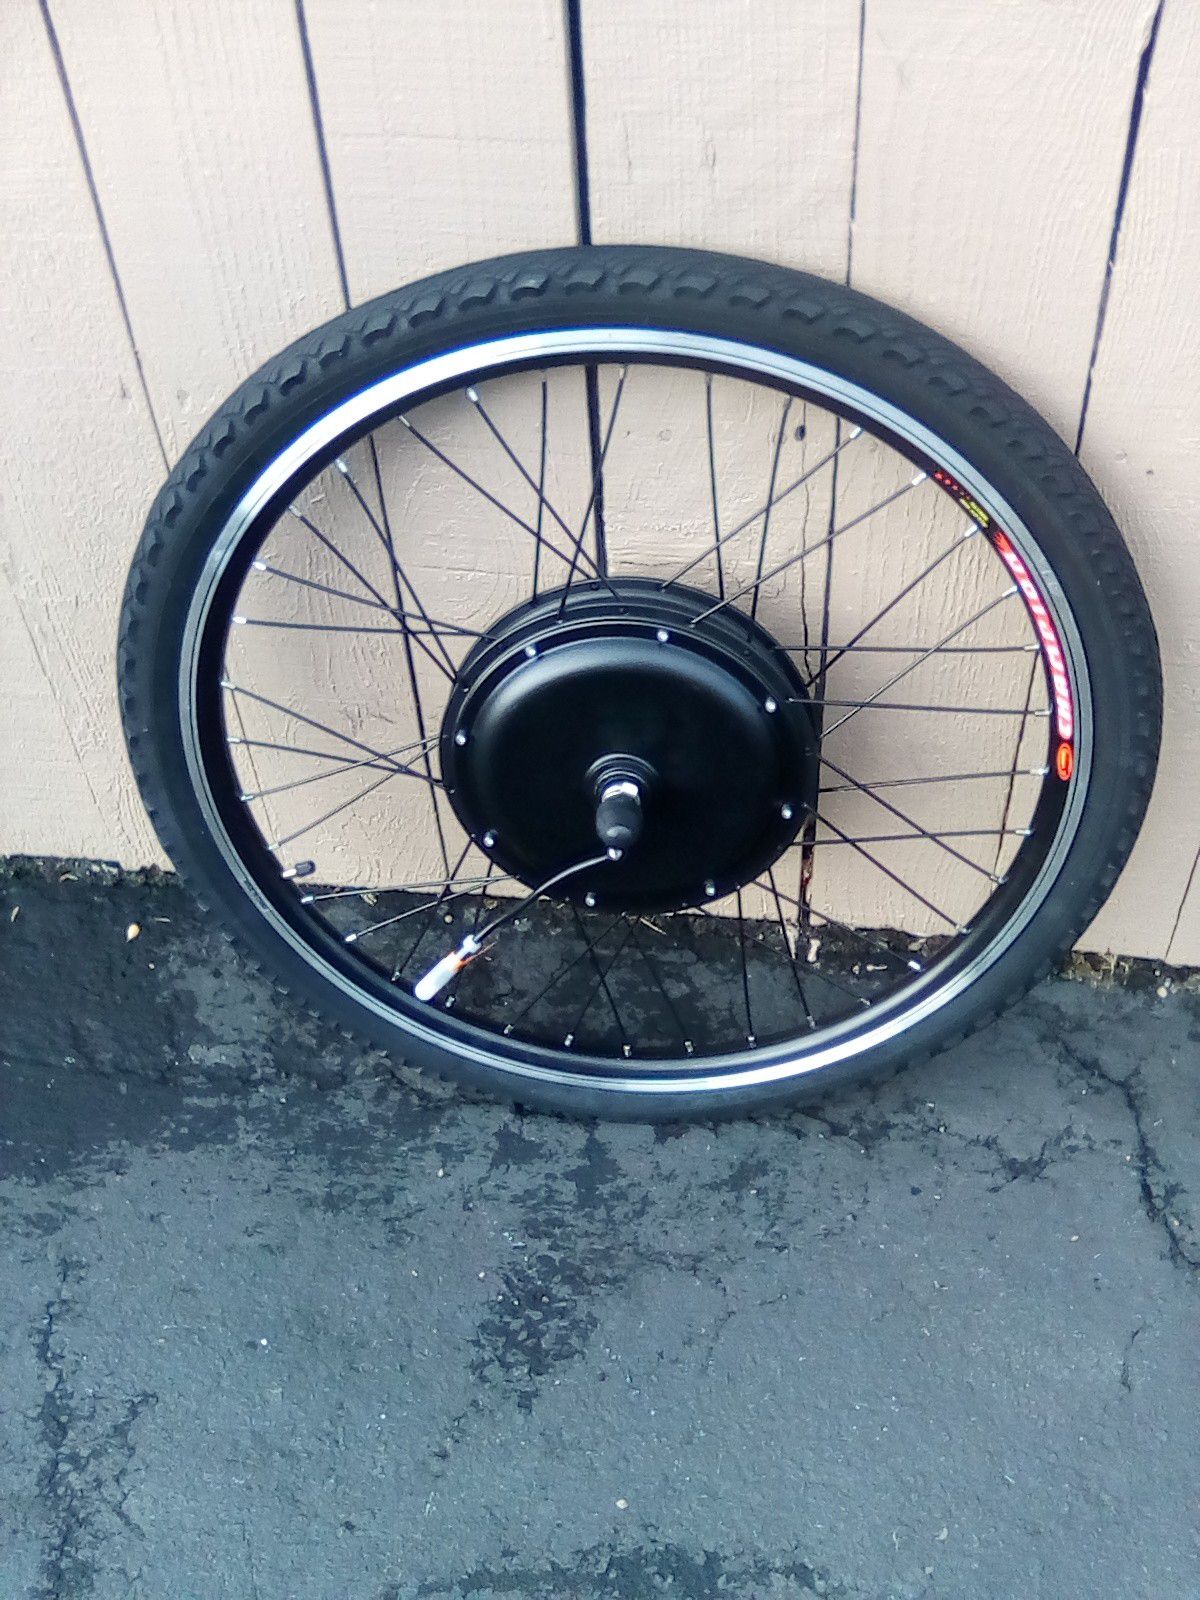 Brand New 26 front wheel electric bicycle kit worth $269